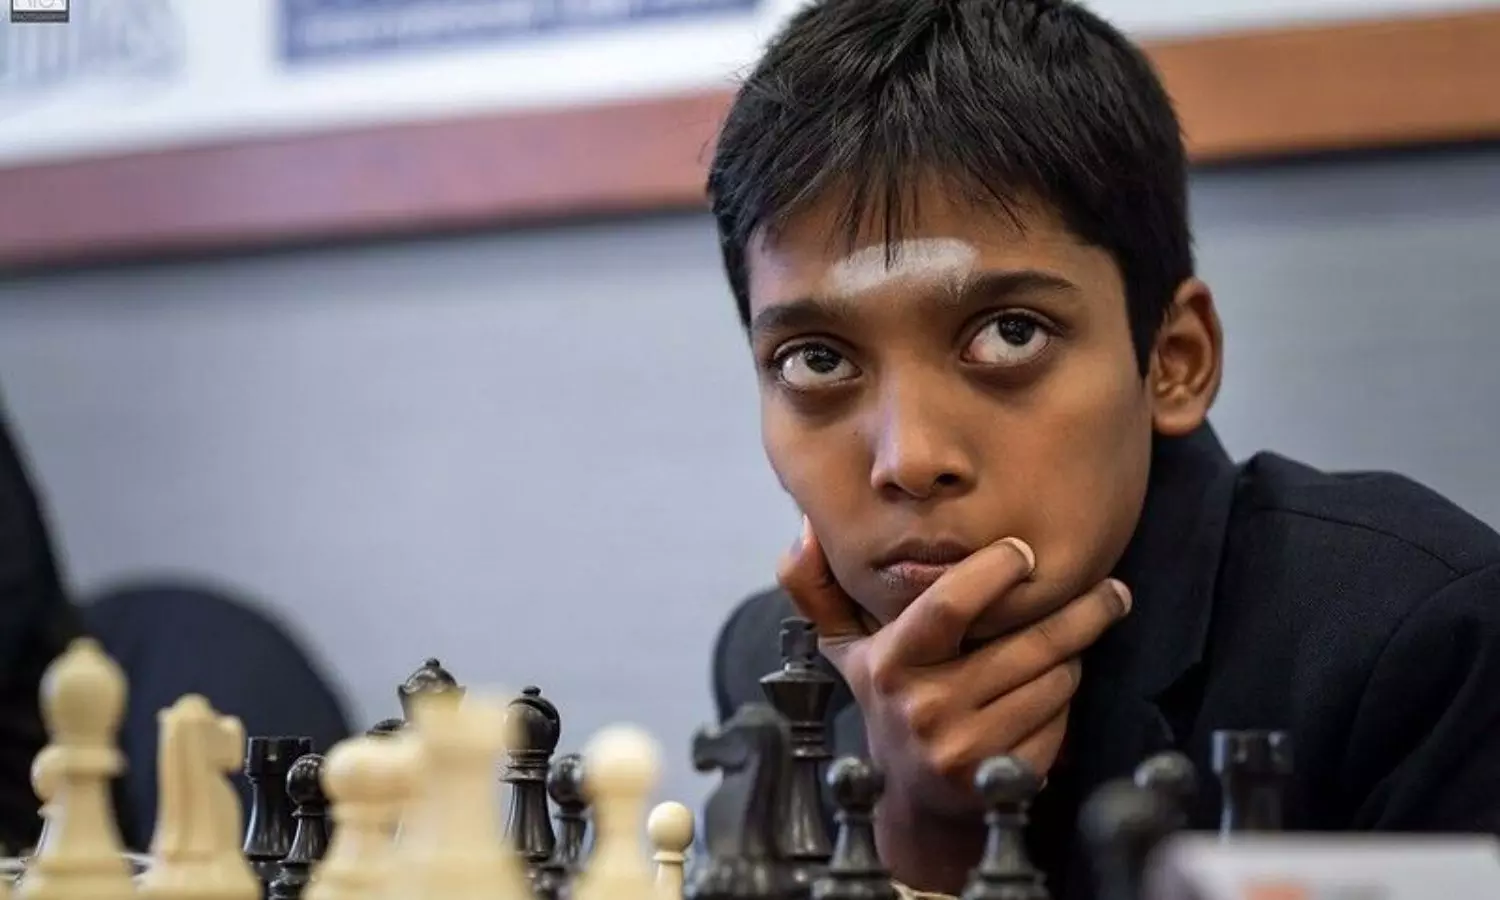 R Praggnanandhaa Wins Rs. 66 Lakhs After He Finishes As Runner-Up